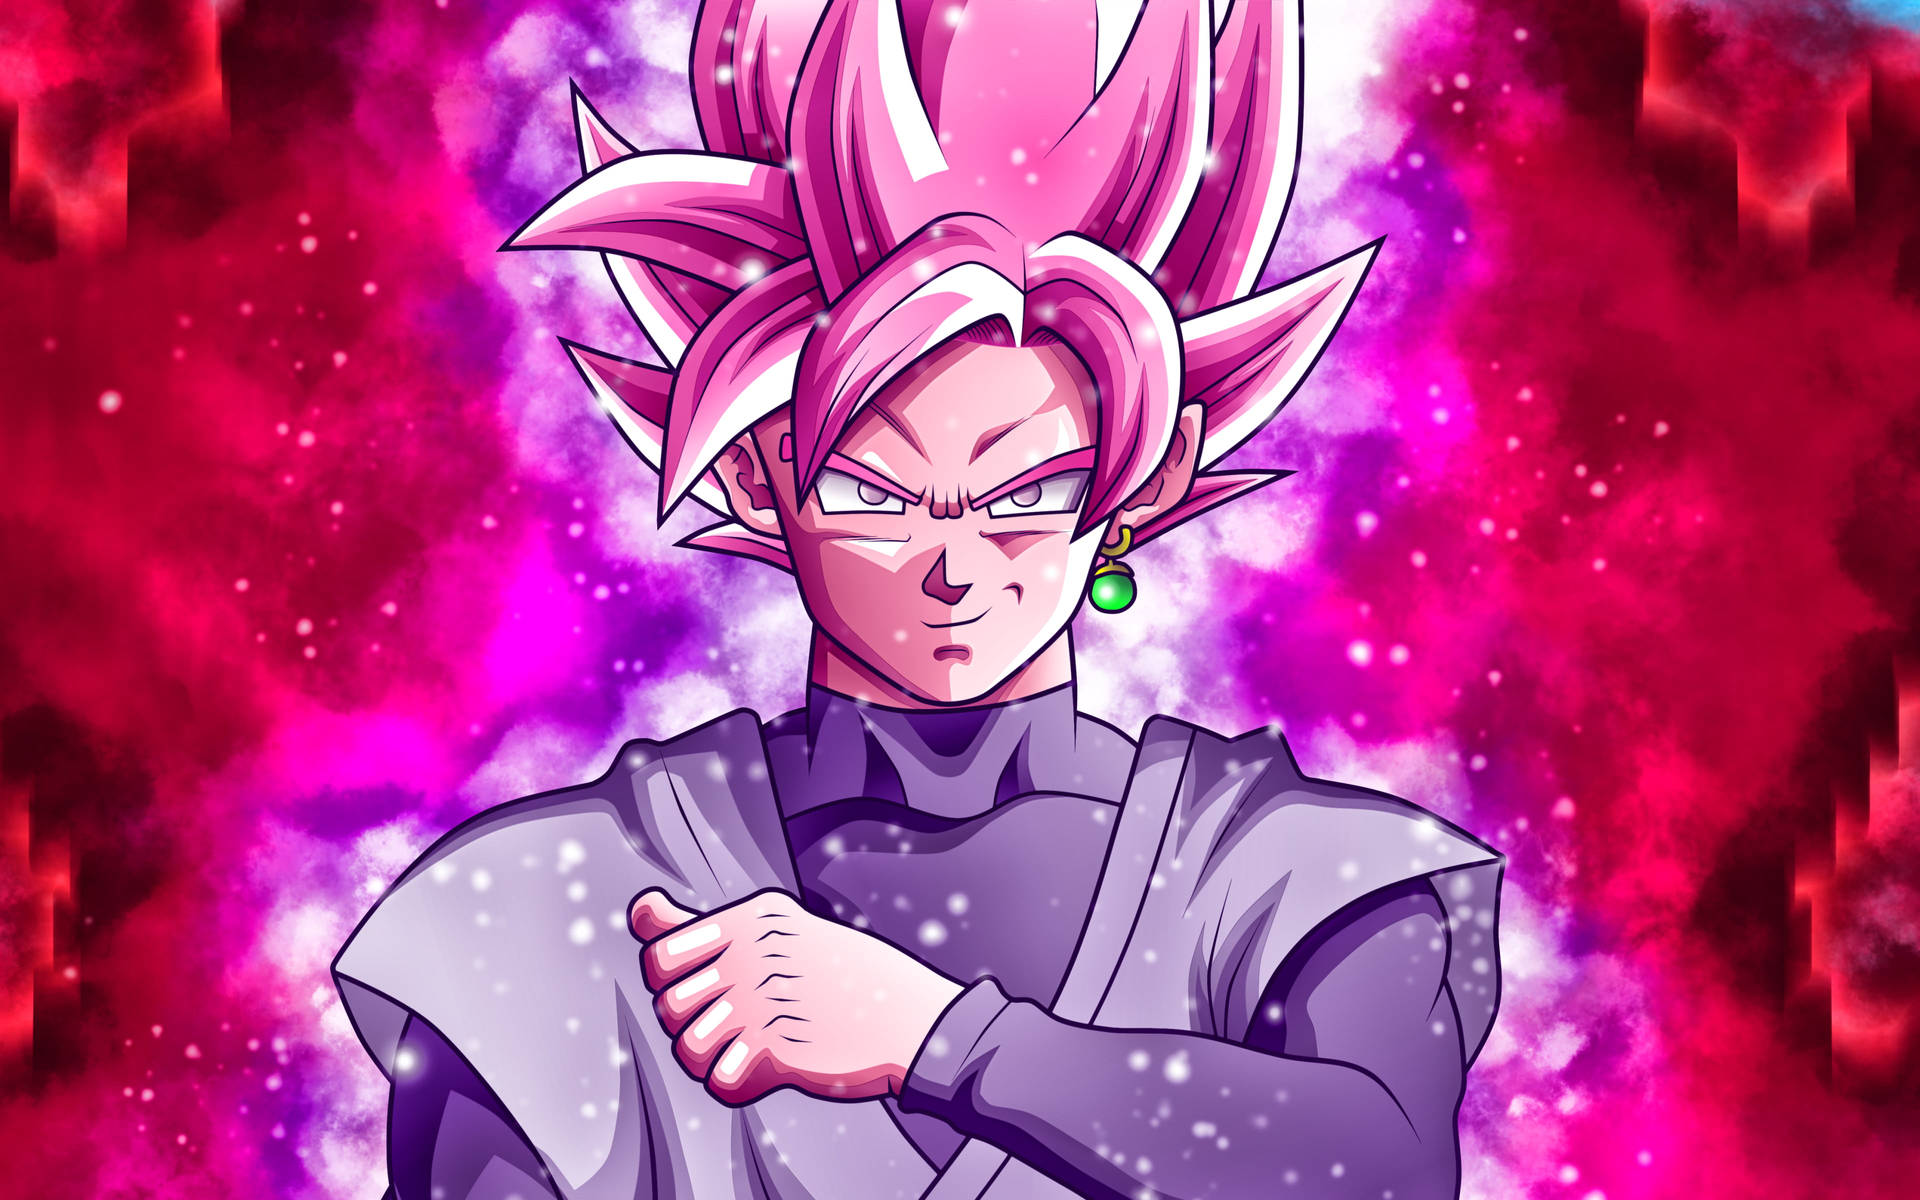 Black Goku Rose 4k With Hand On Chest